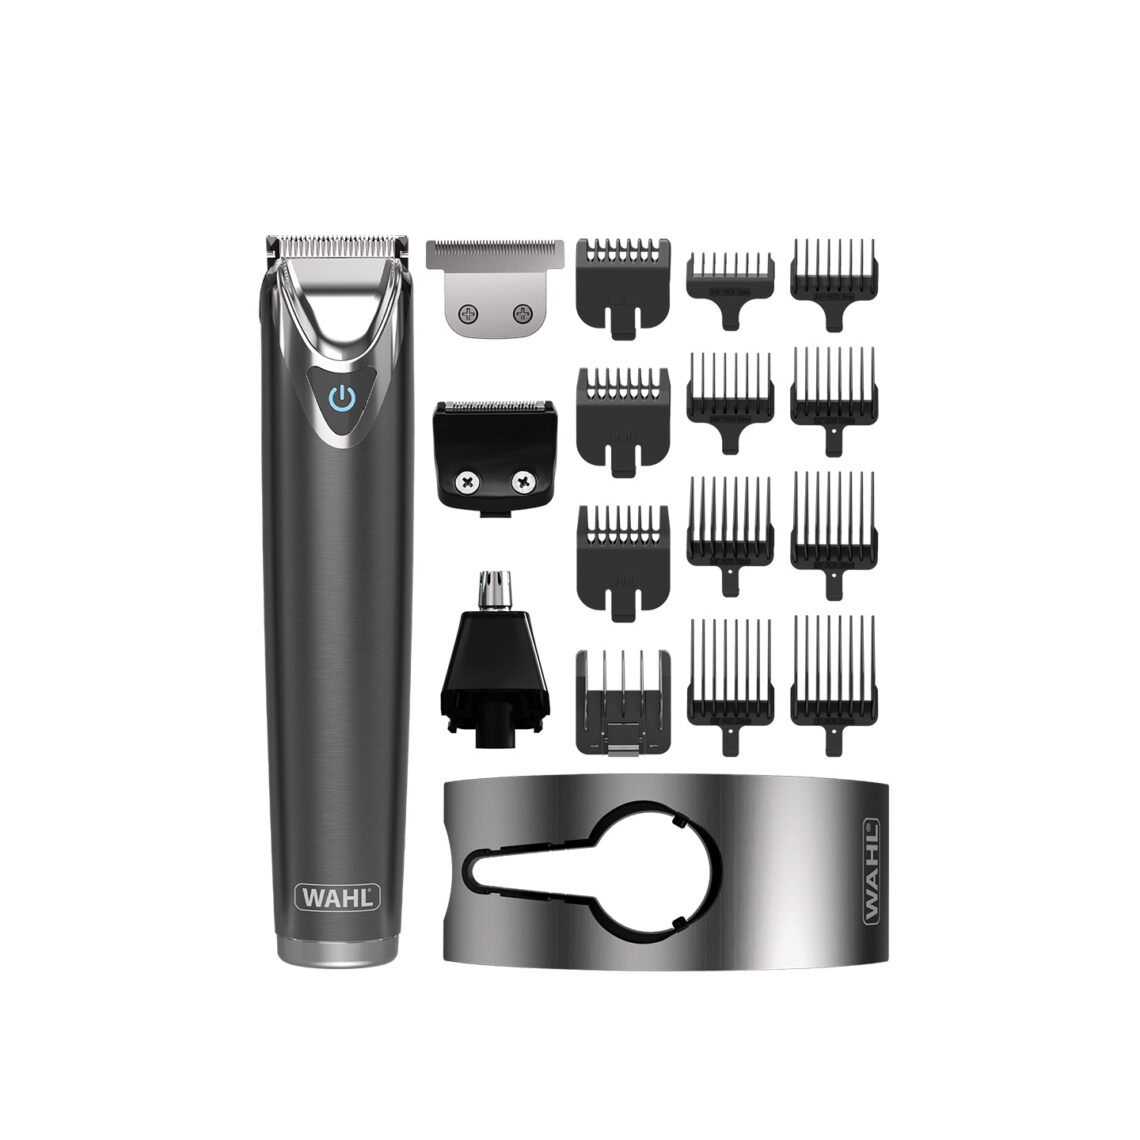 wahl clipper stainless steel trimmers and clippers